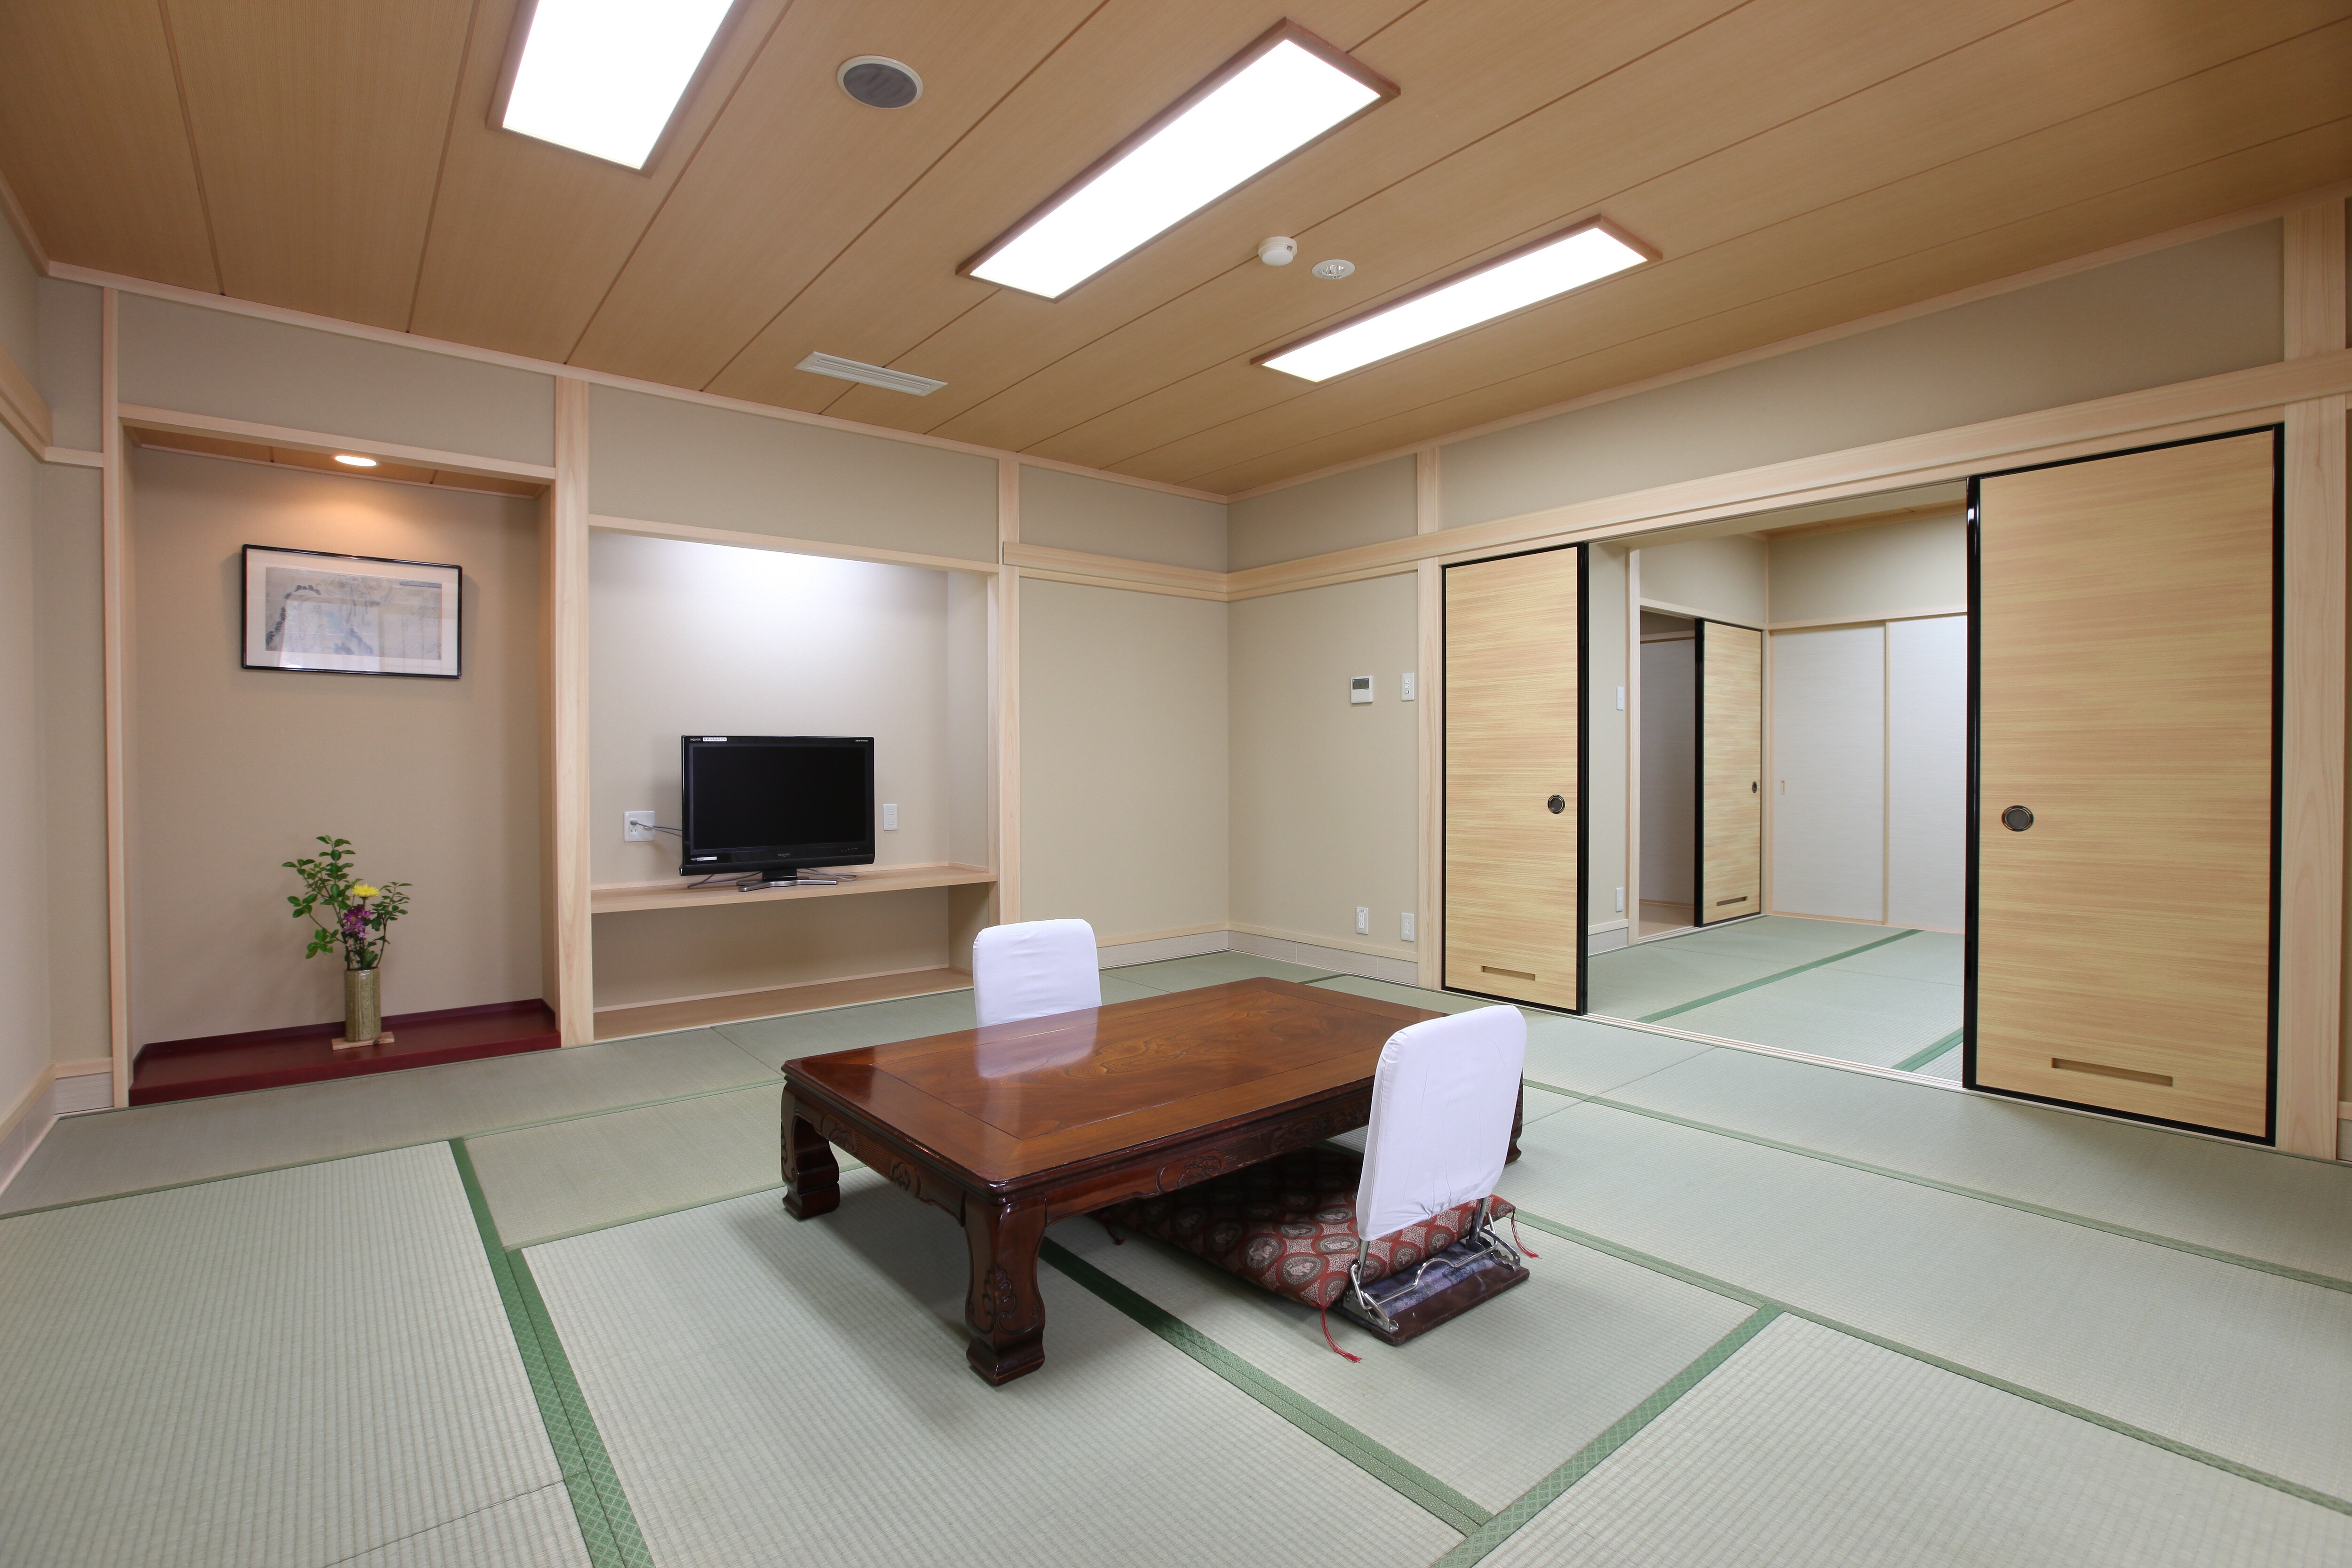 << West Building >> Japanese-style room for two consecutive rooms, an example